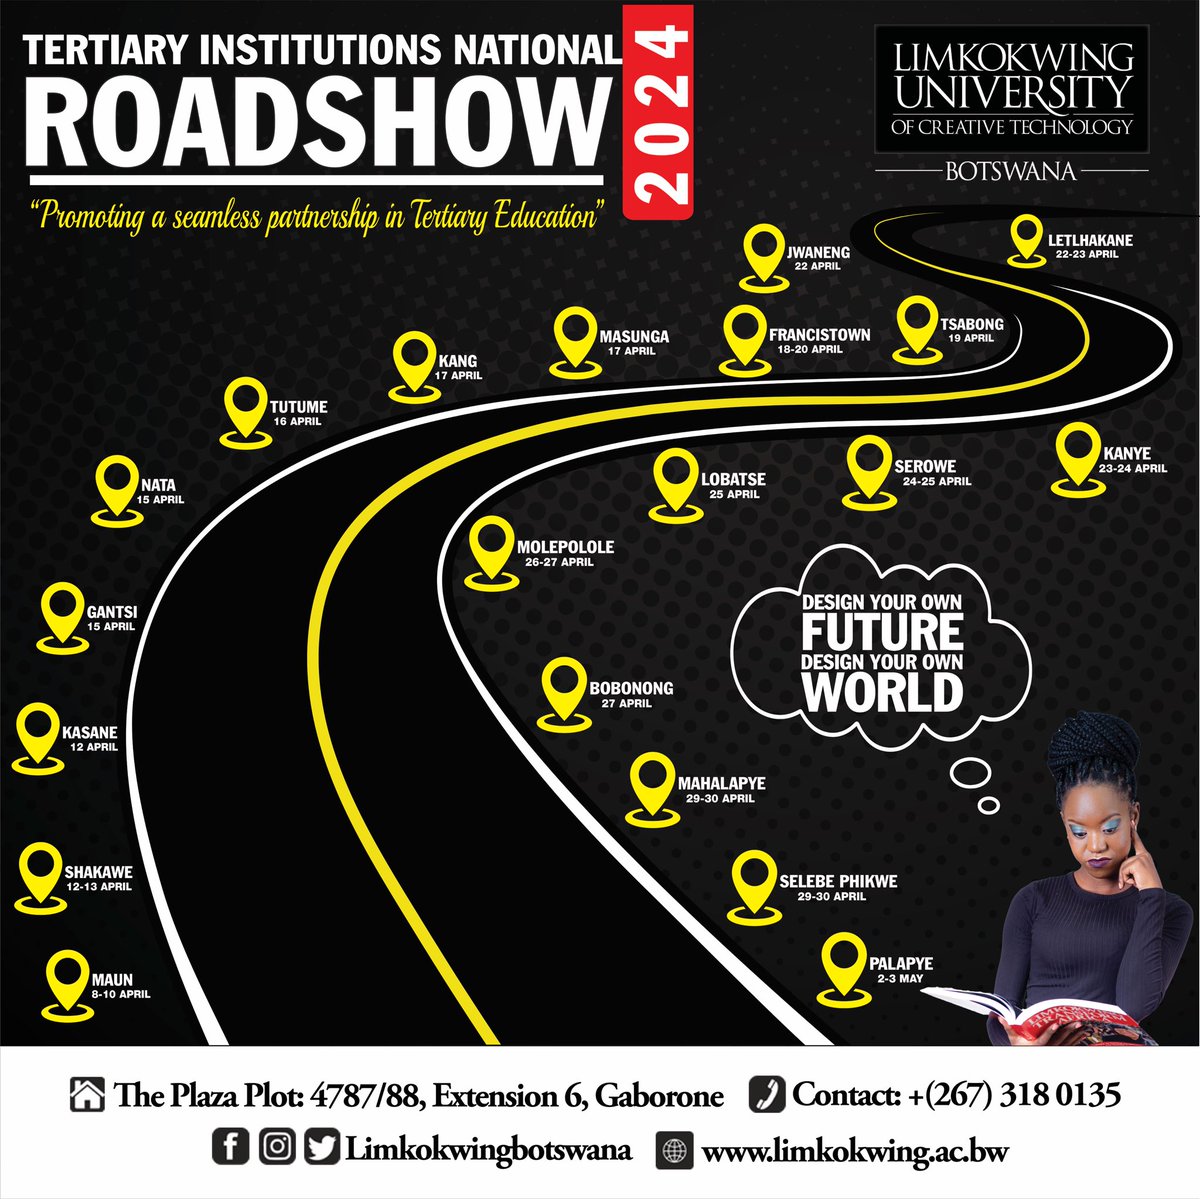 📌2024 New Intake

Limkokwing Botswana is part of of the ongoing 2024 BW Tertiary Institutions National Roadshow!

Our Recruitment Teams will be in your area to assist you enroll for programmes that shape your future career

#DesignYourFuture
#DesignYourOwnWorld